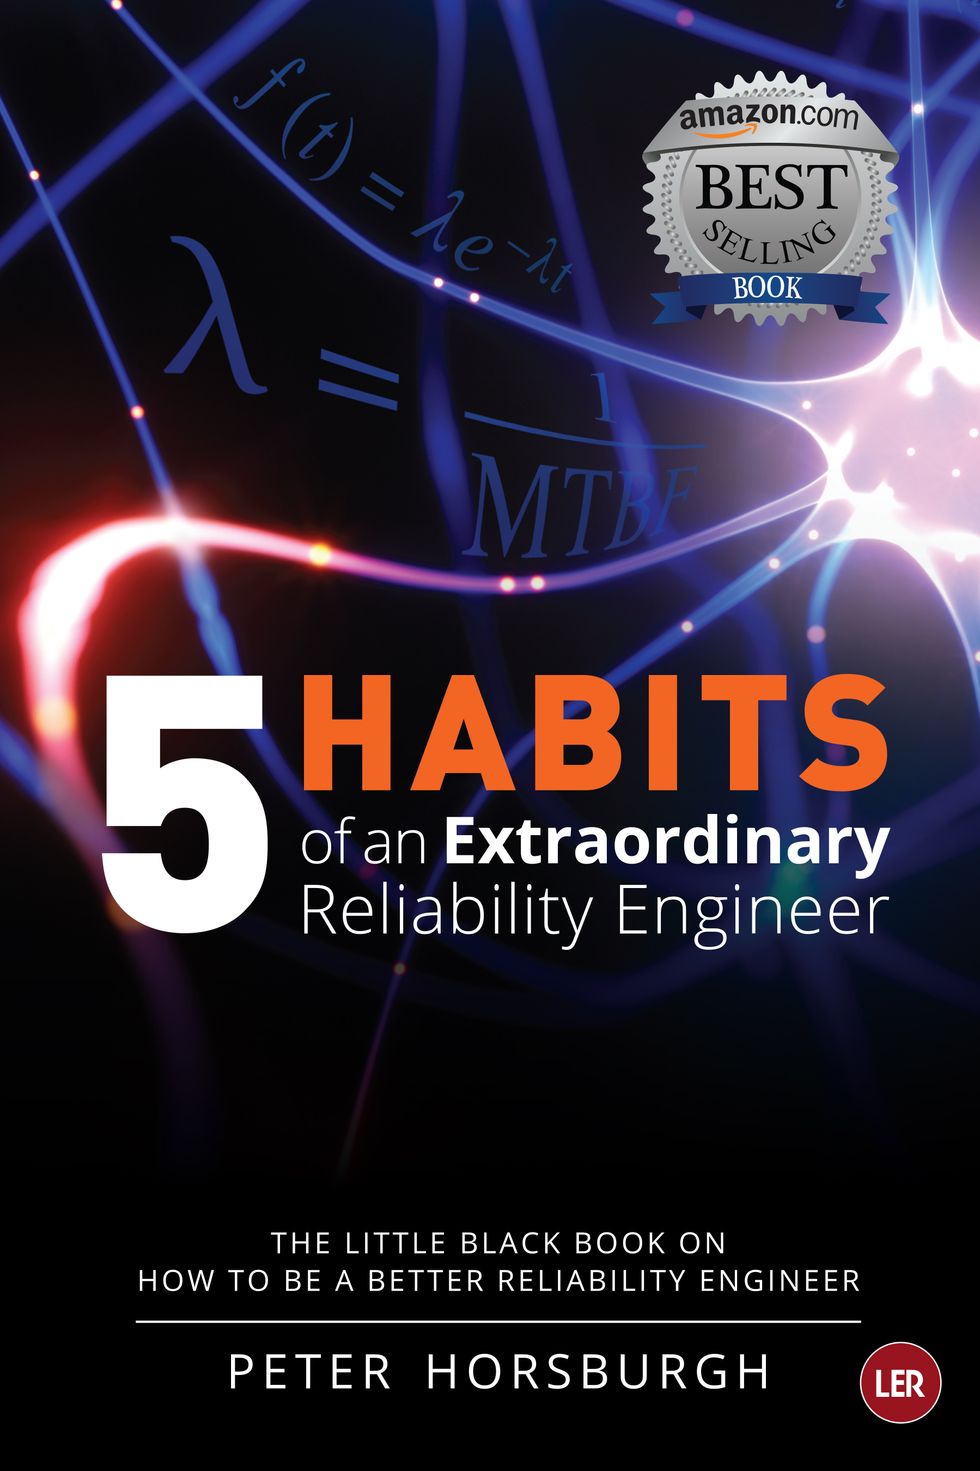  5 Habits of an Extraordinary Reliability Engineer 